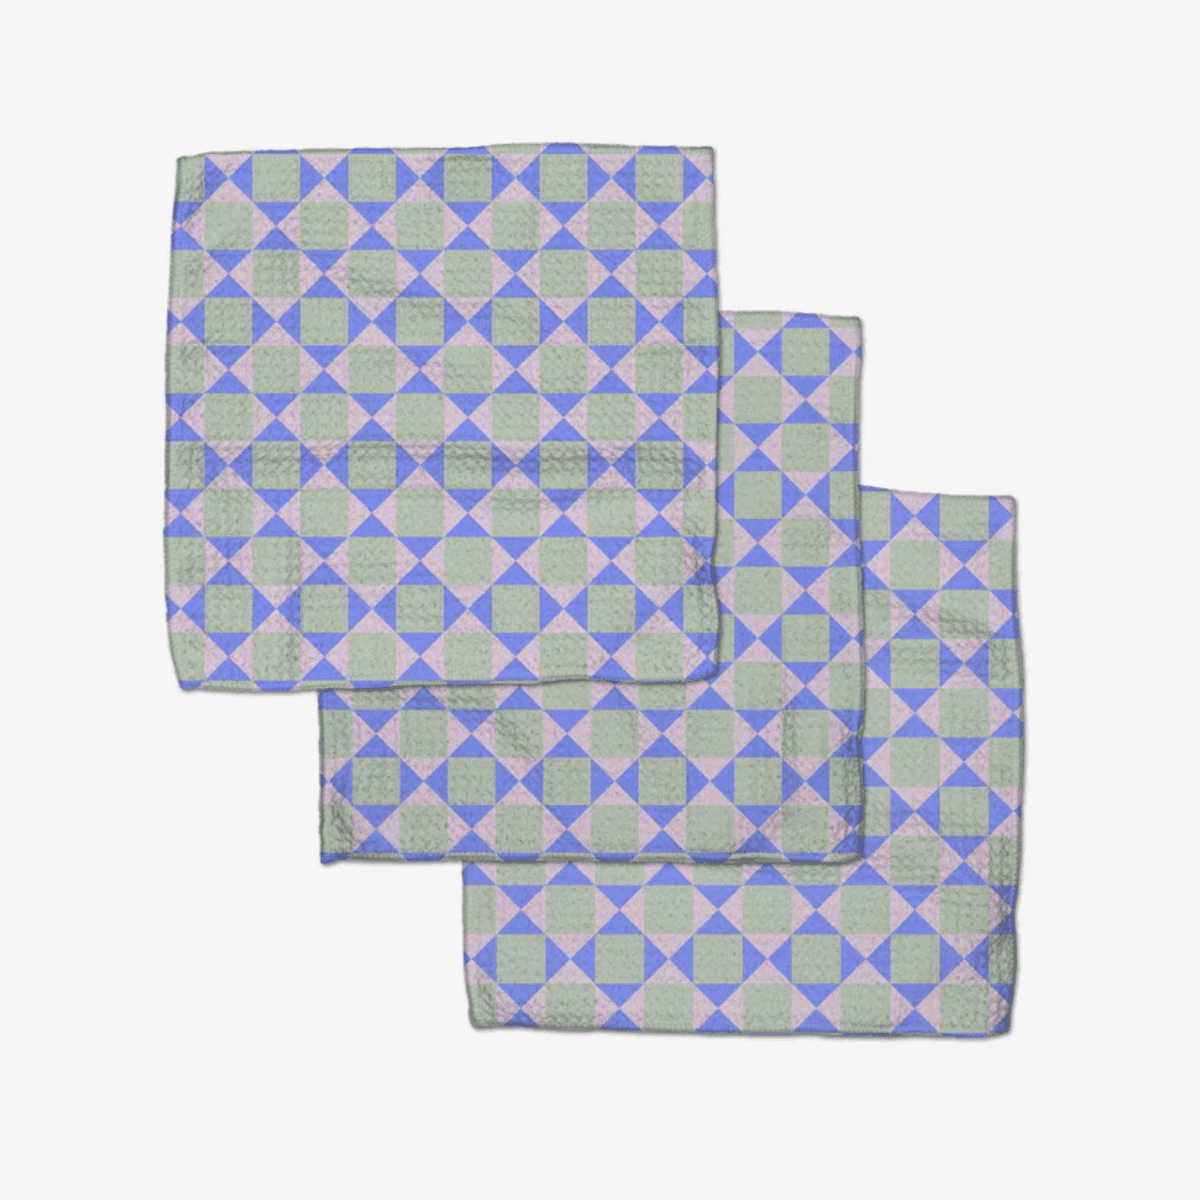 Geometry Towels are restocked! Fabulous Designs. Better Clean